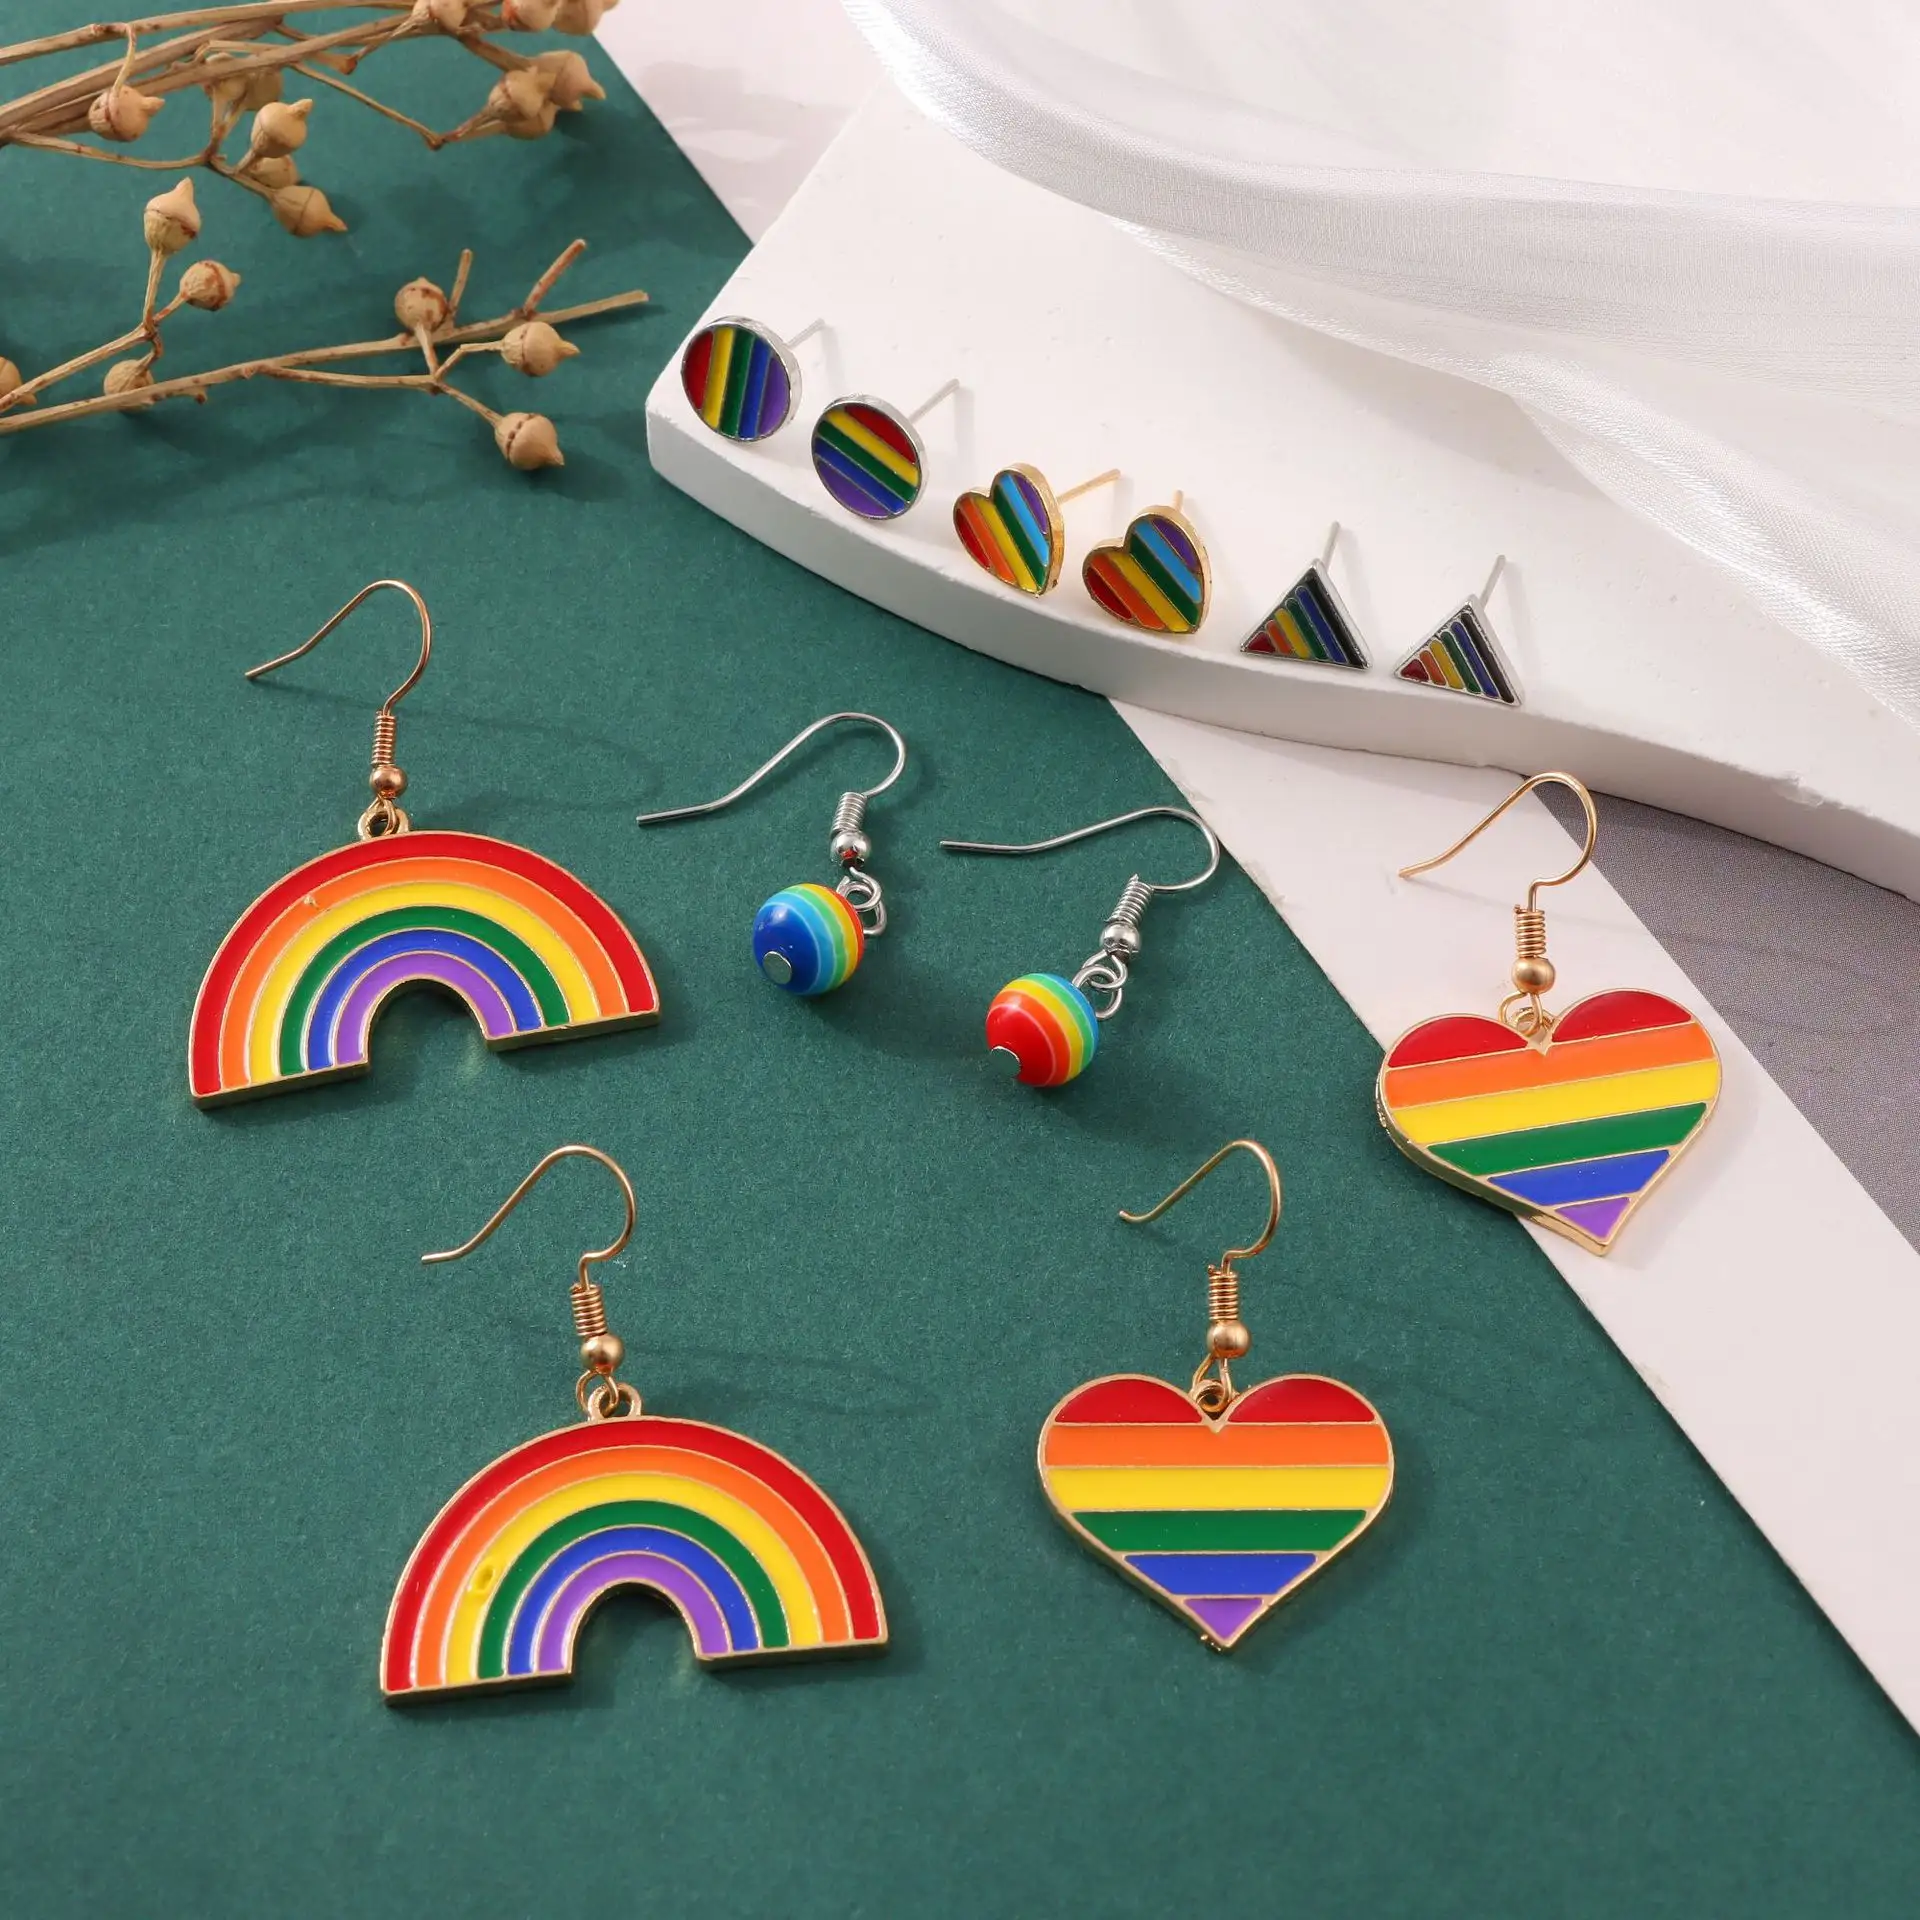 New colorful 6Pairs/Set drop oil alloy earrings fashion design lady girl rainbow earrings jewelry wholesale